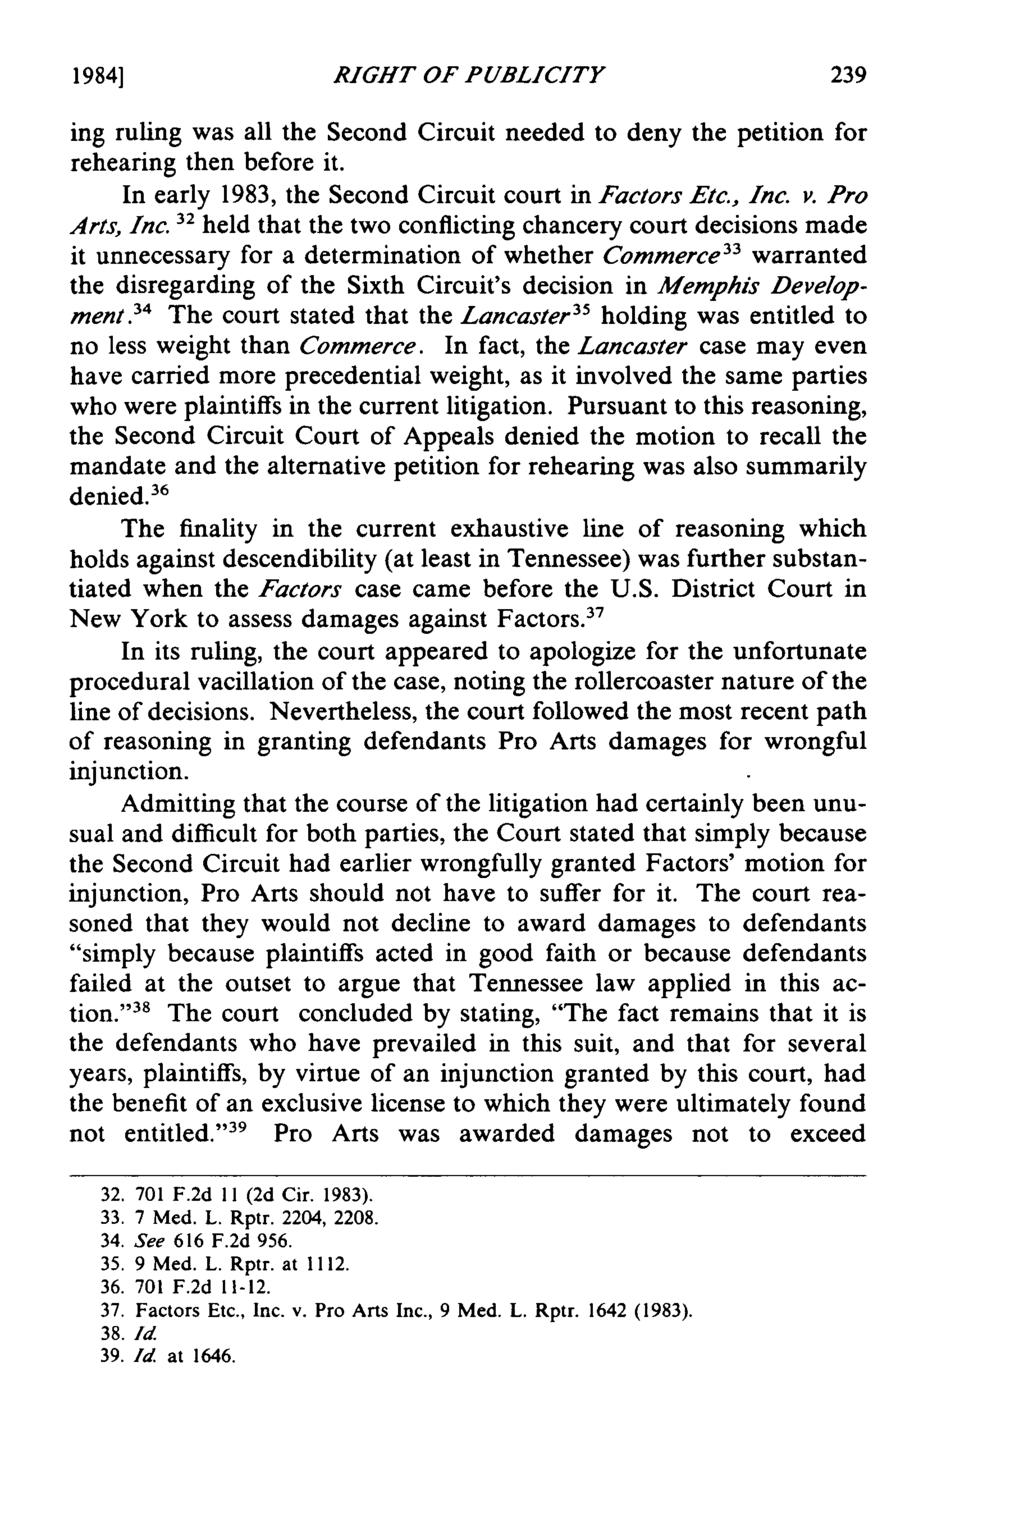 1984] RIGHT OF PUBLICITY ing ruling was all the Second Circuit needed to deny the petition for rehearing then before it. In early 1983, the Second Circuit court in Factors Etc., Inc. v. Pro Arts, Inc.